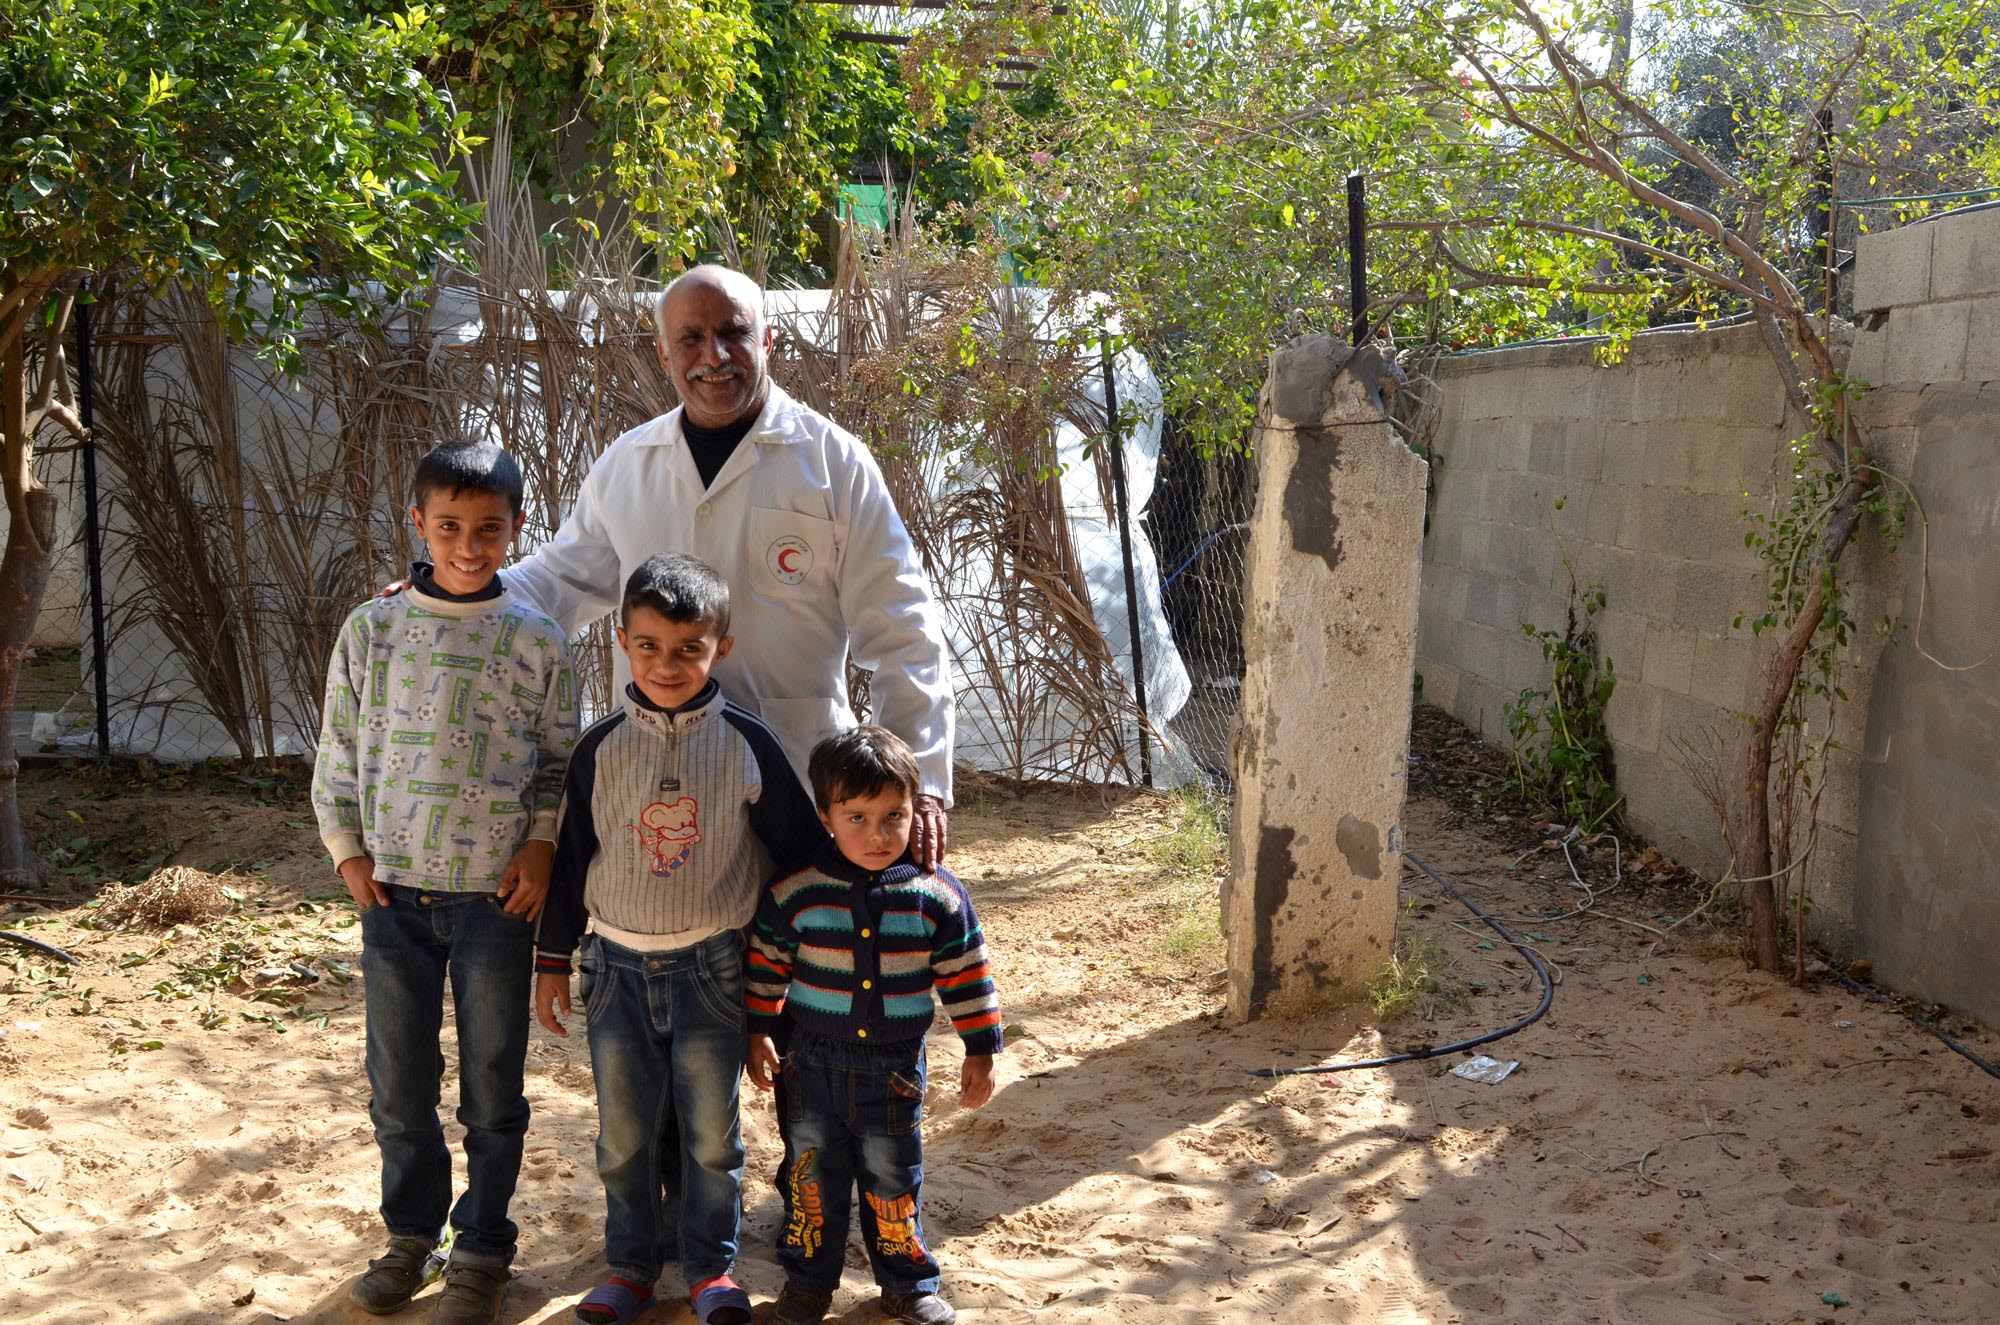 Abu Hossam, head of a Gaza family clinic, says they never close their doors to anyone